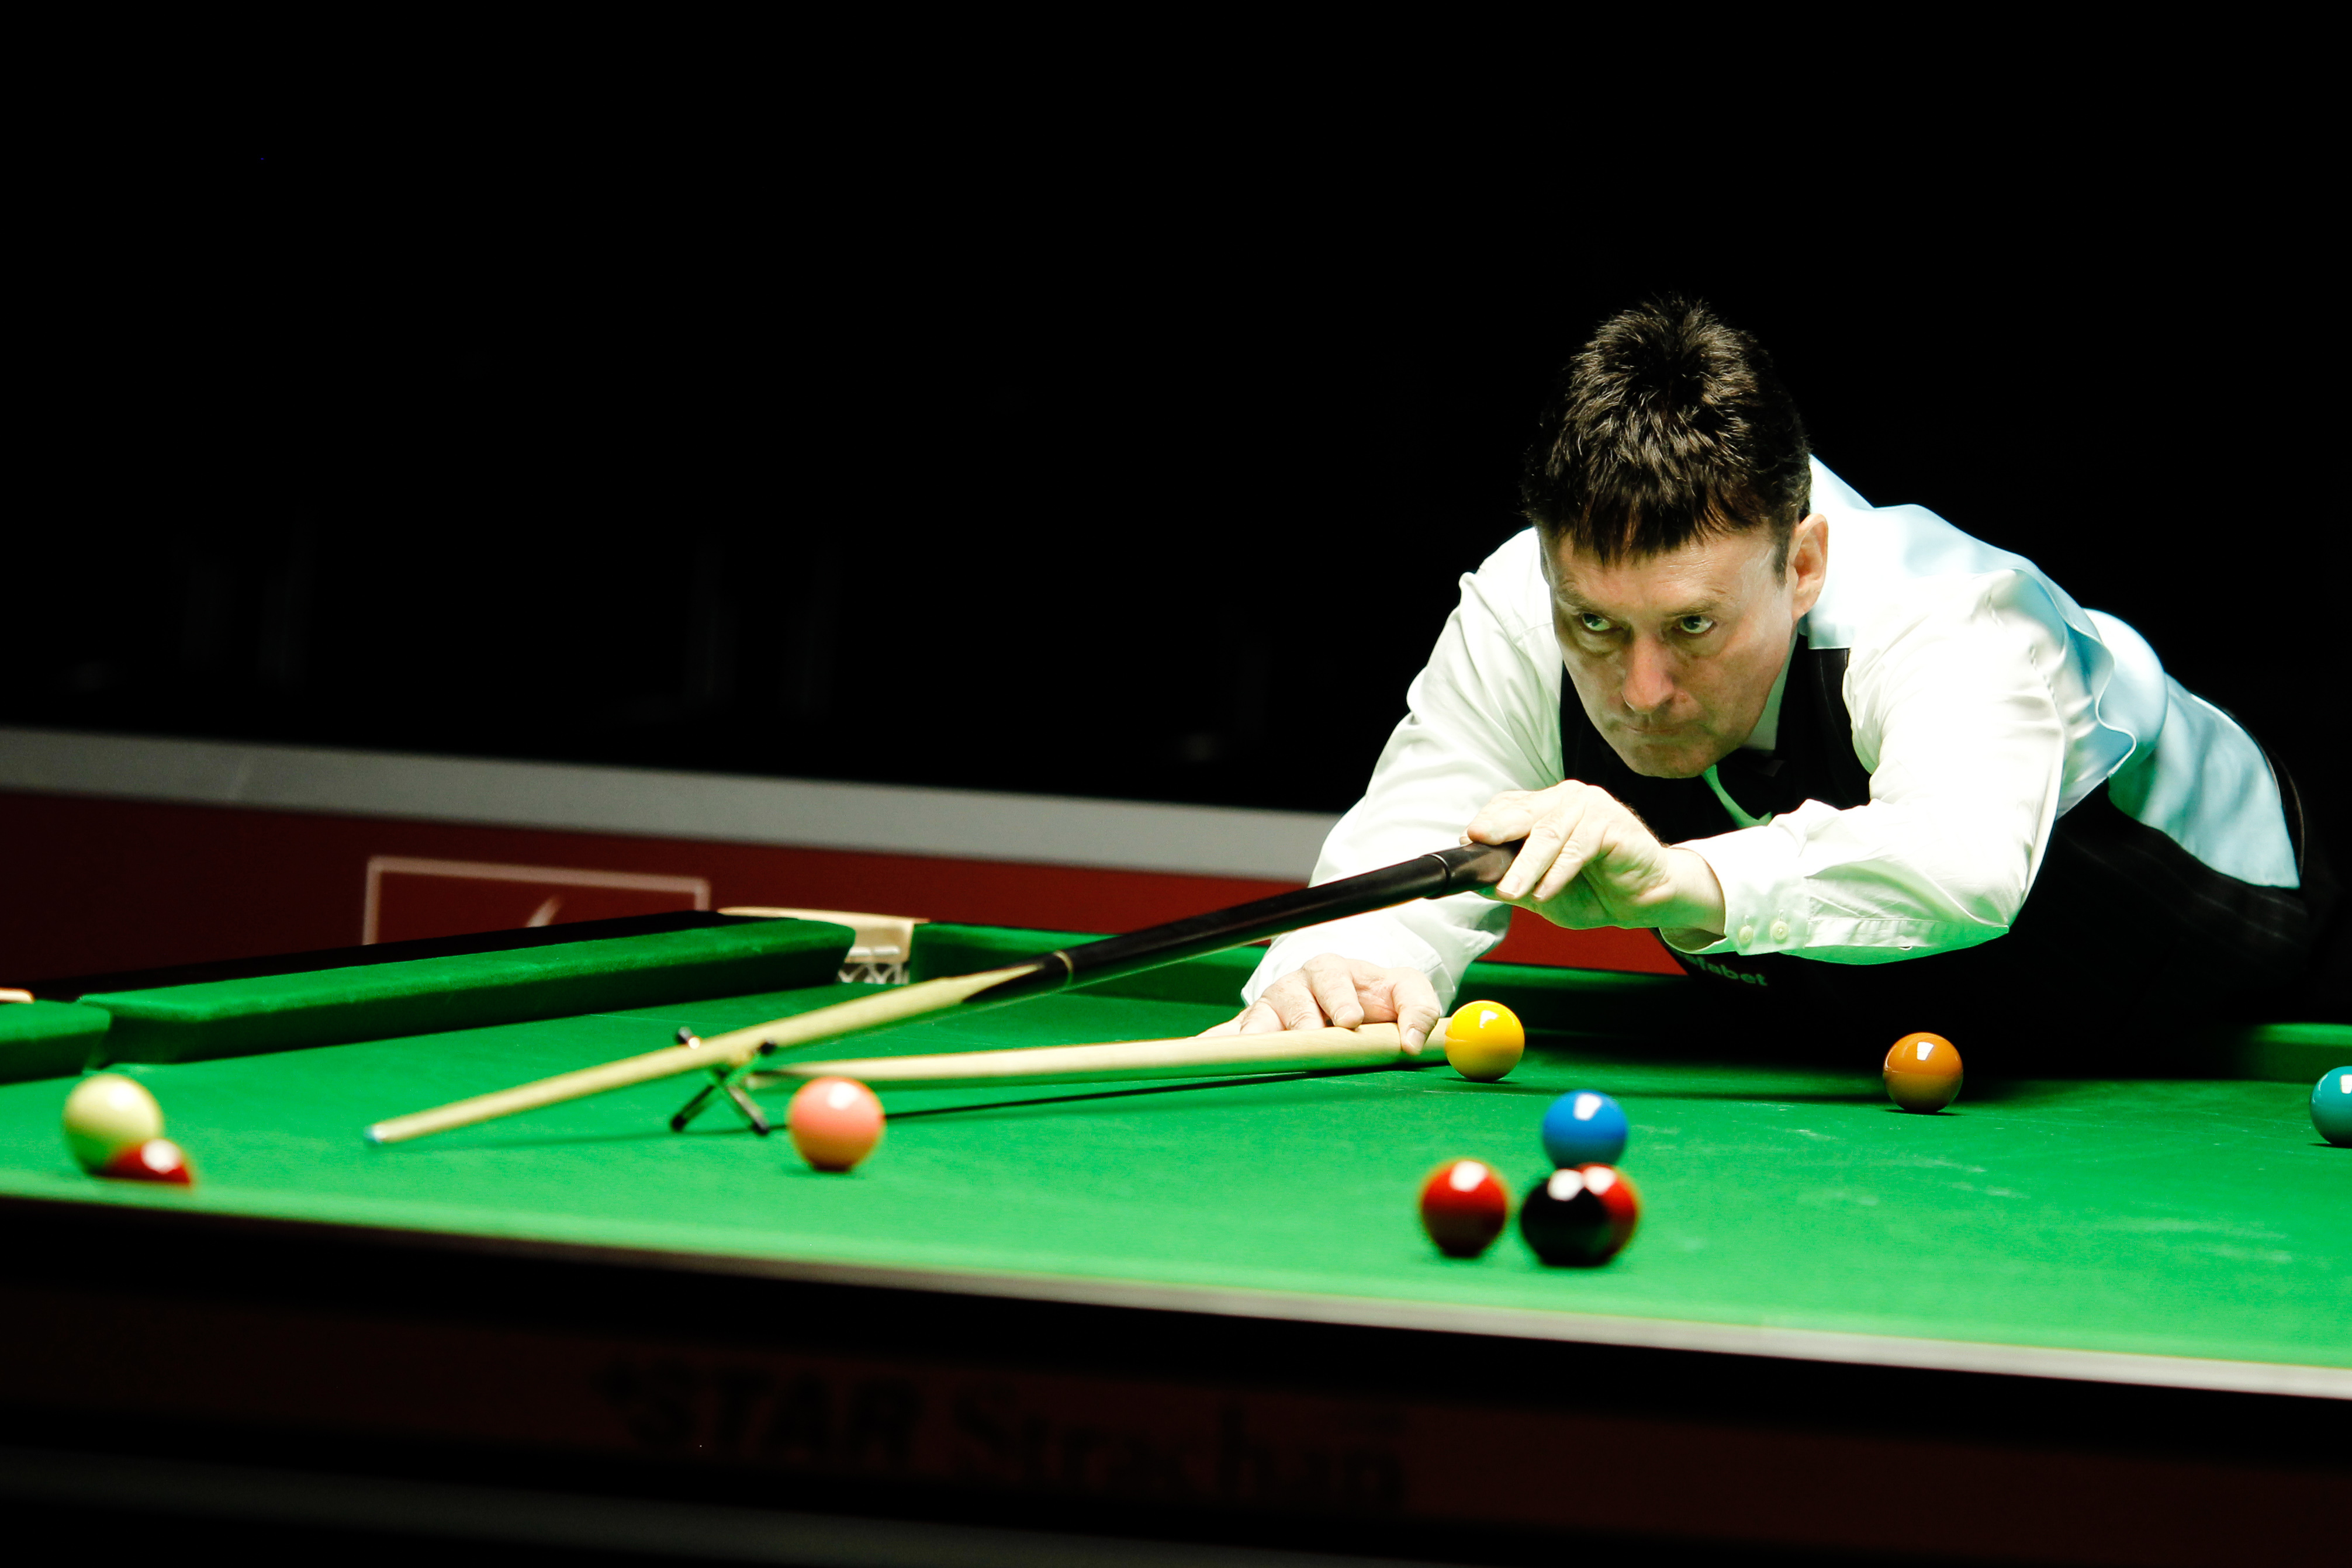 Watch World Seniors Snooker Championship LIVE - Stephen Hendry, Jimmy White and Ken Doherty in action - Live